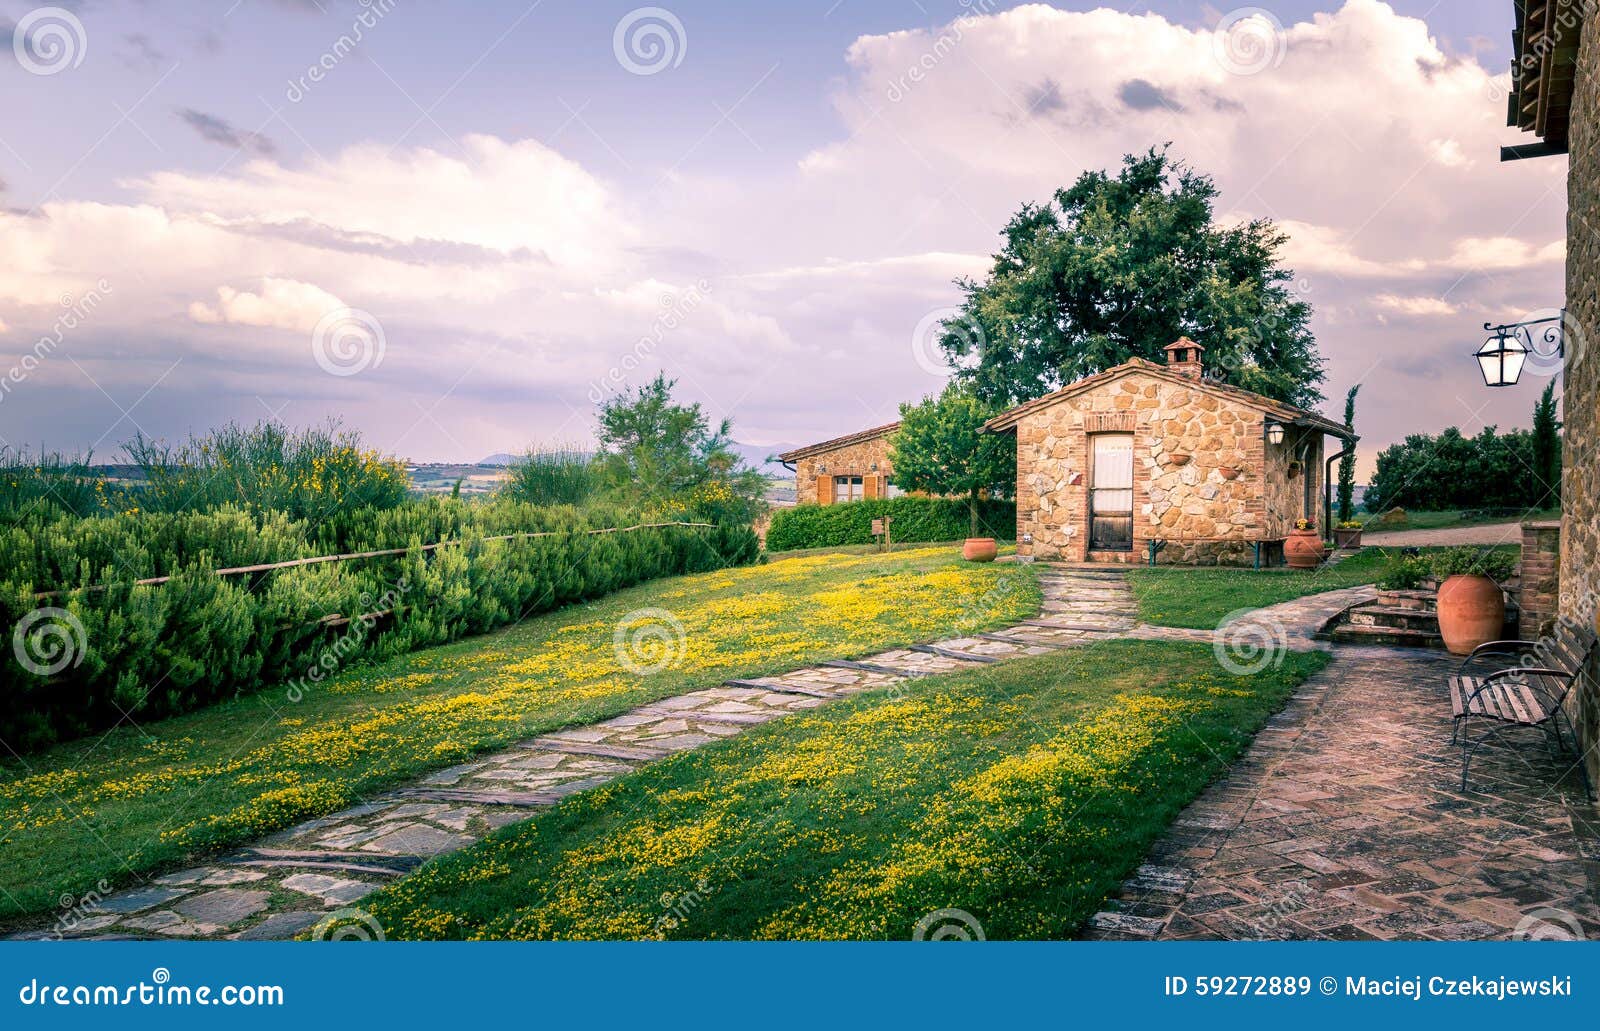 countryside scenery in tuscany